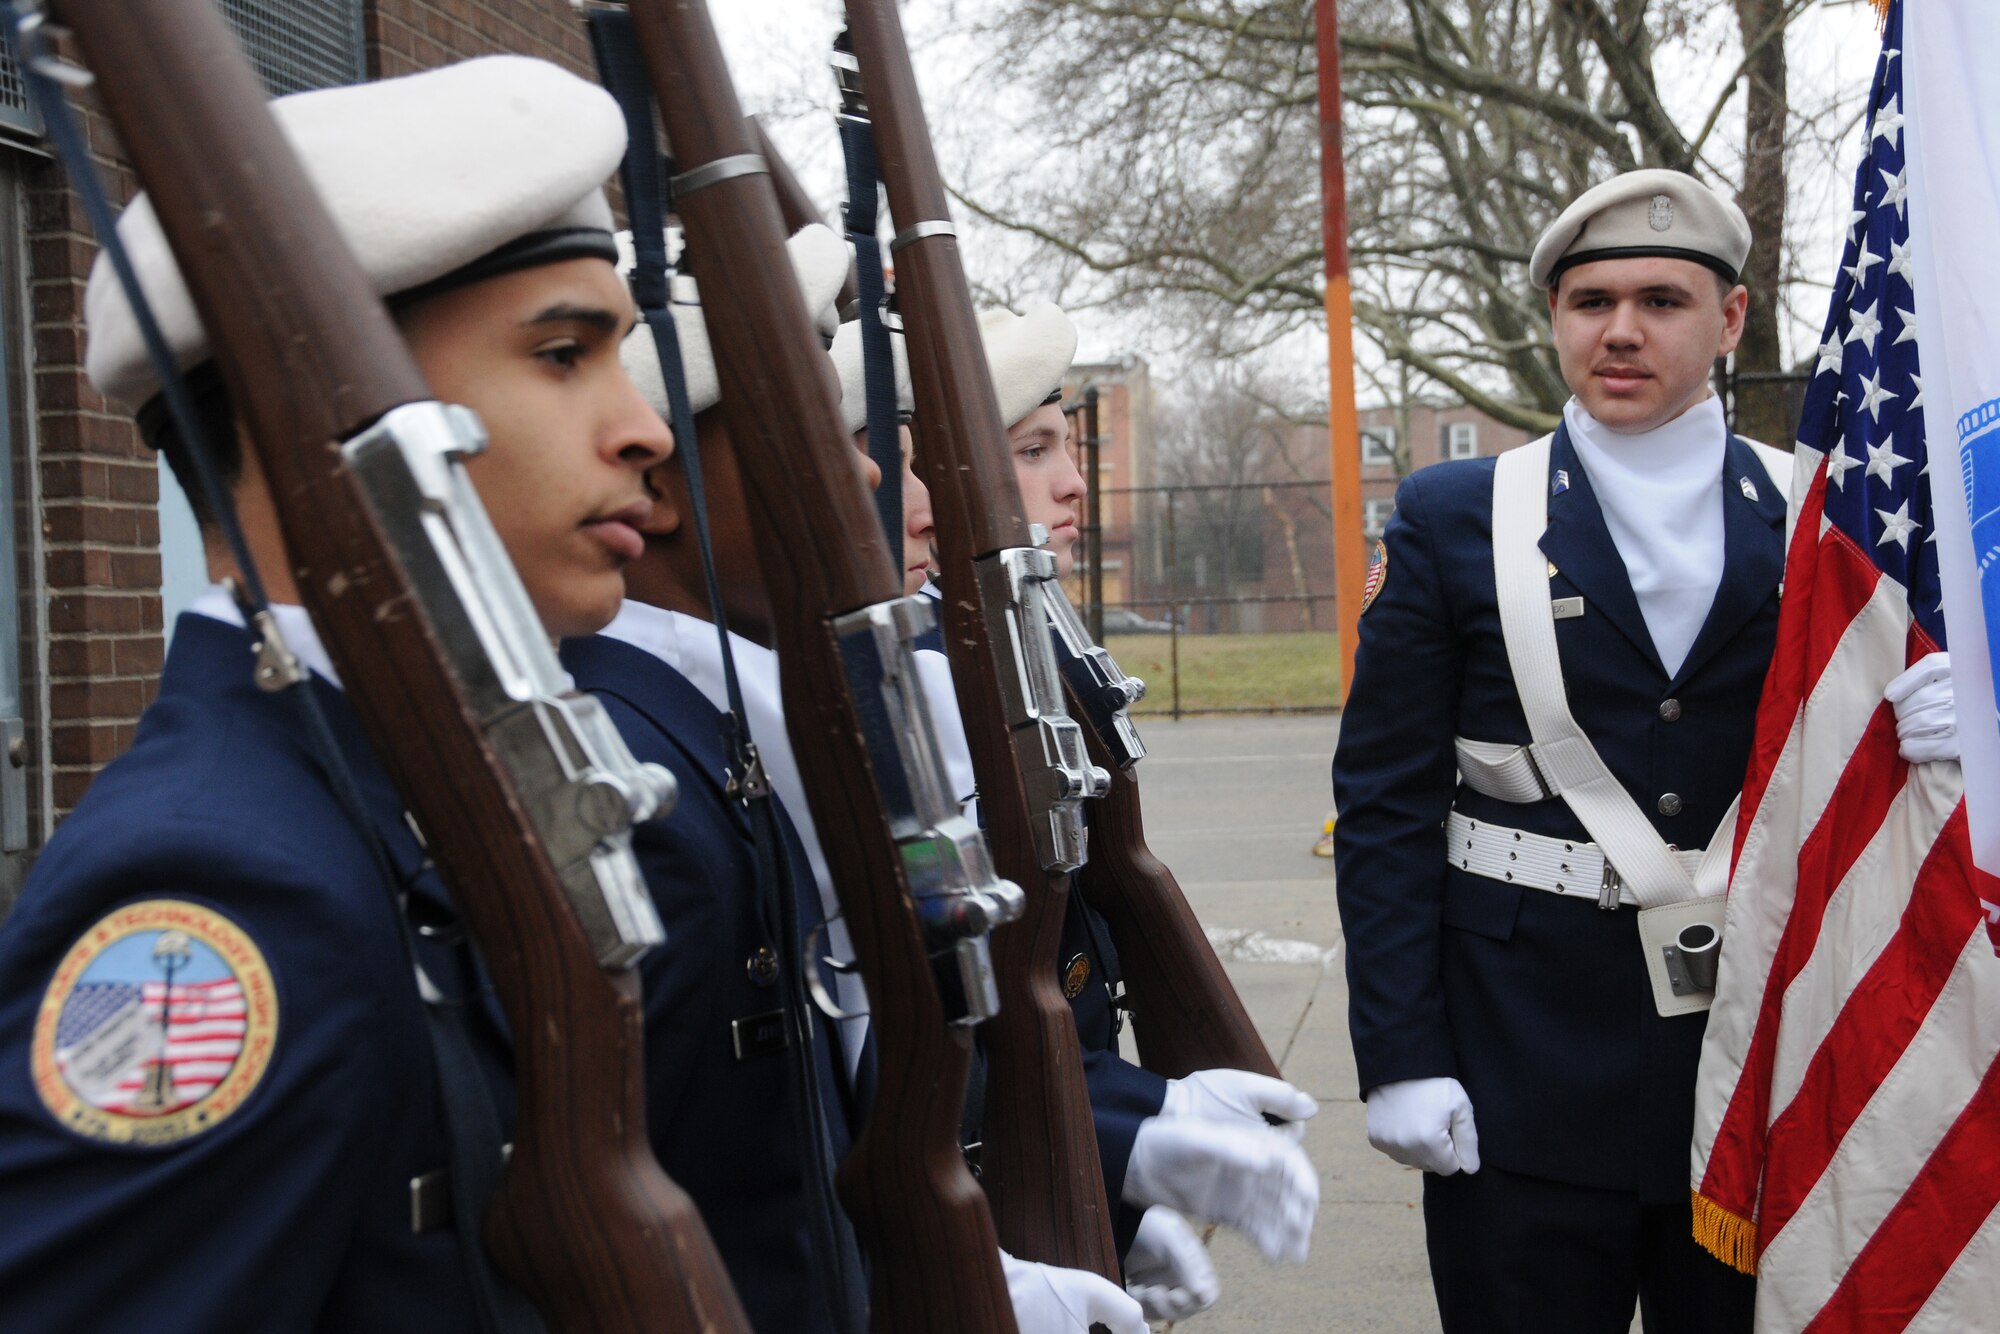 On Feb. 23, color guard members from the Air Force Jr. ROTC program of the Swenson Arts and Technology High School in Philadelphia, stand fast as a 21-gun salute cracks the morning air during the 18th annual Octavius V. Catto ceremony in Center City Philadelphia. Shown left is Joey Baez (color guard commander), Noah Johnson, Sean Hydock, Sam Rinear and checking alignment overtop is Wallace Lugardo.